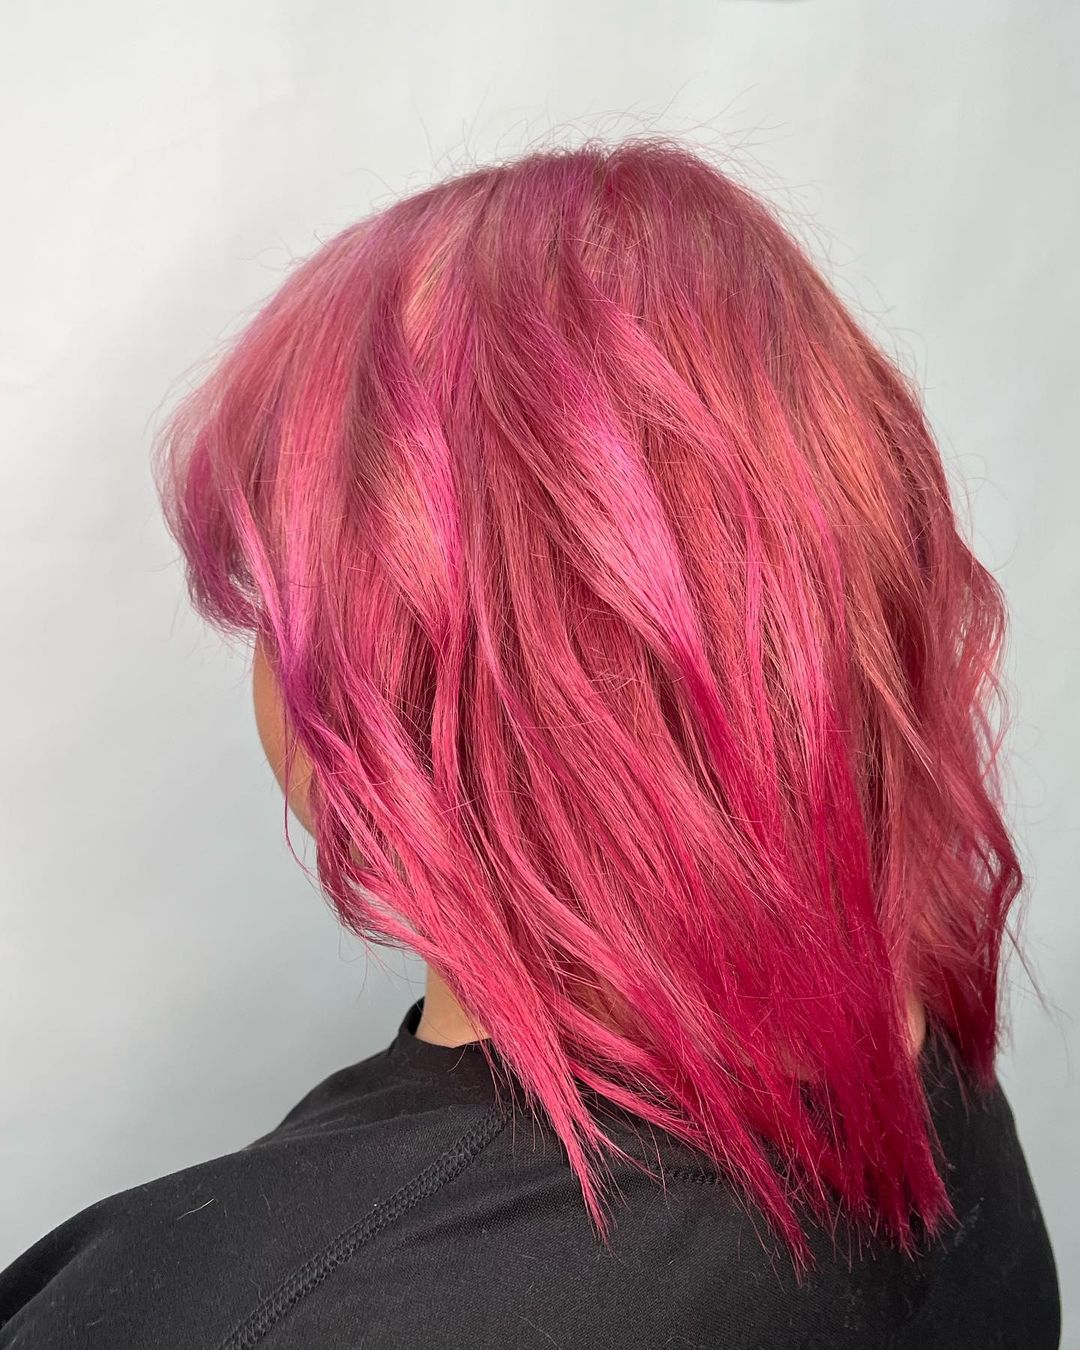 pink ombre hair color 116 Ombre pink hair blonde | Pastel pink ombre hair | Pink balayage Hair Pink Ombre Hair Color for Women